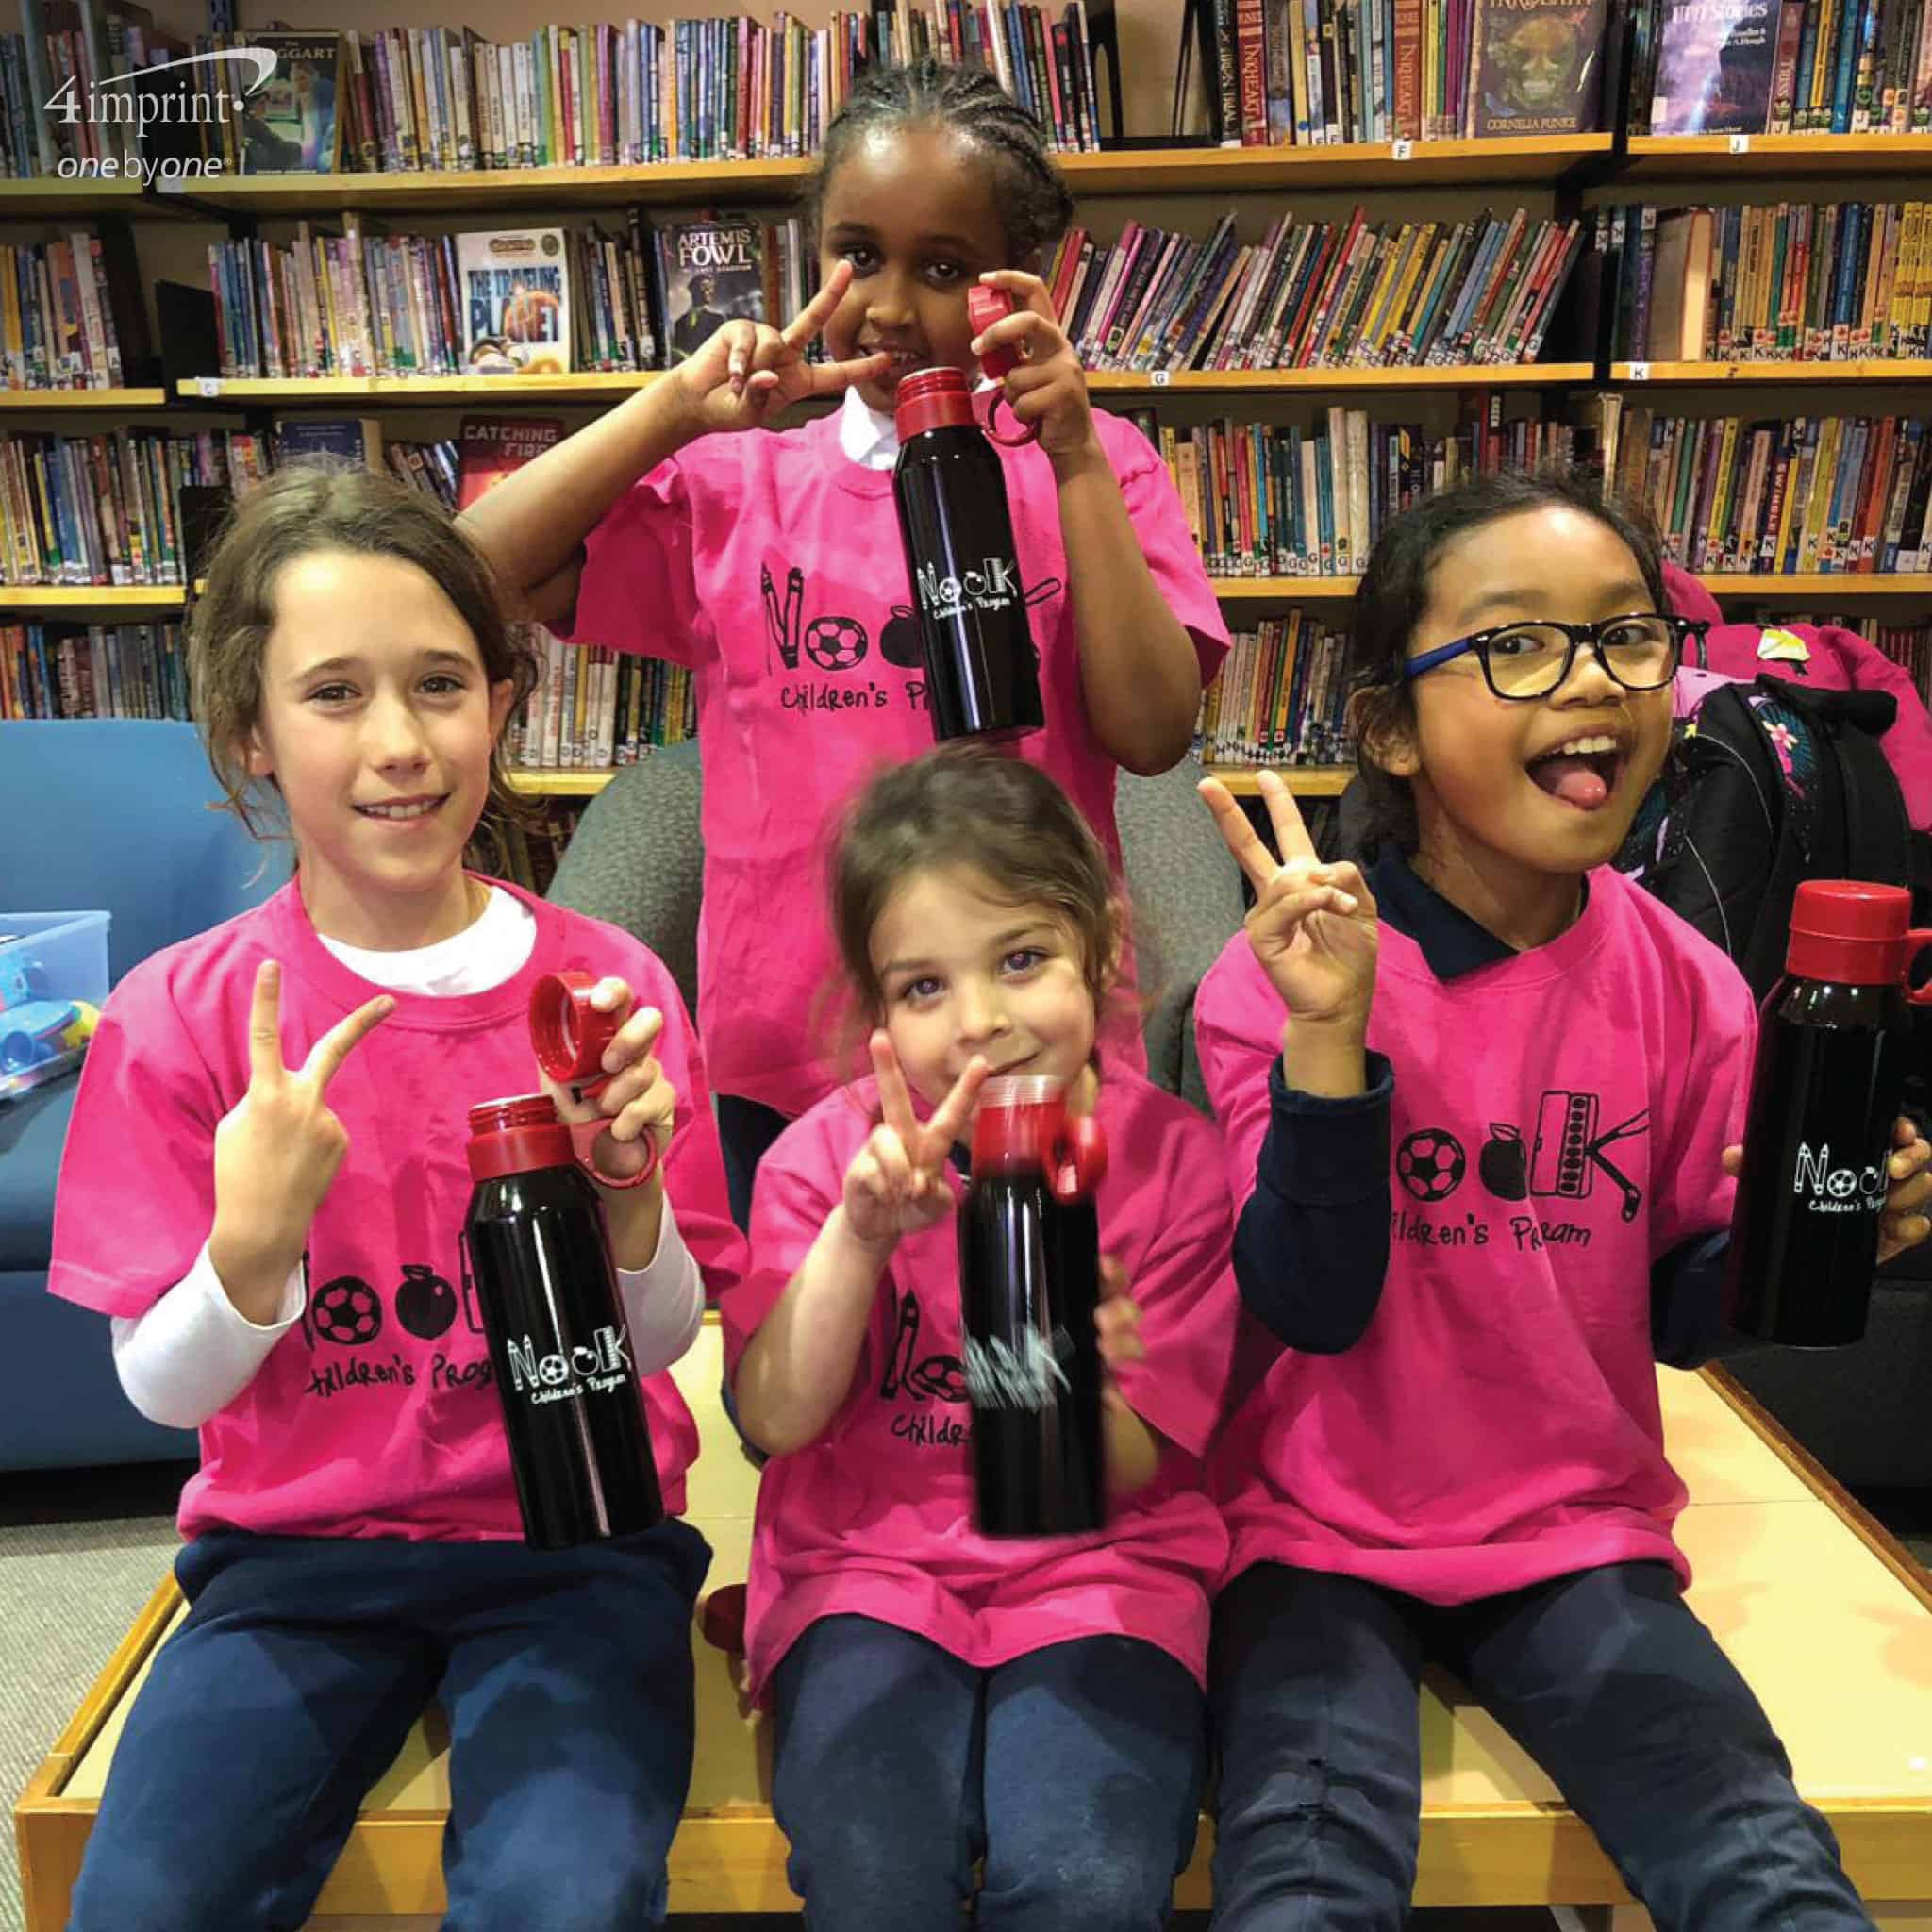 The Nook Children’s Program gives kids a sense of community with water bottle giveaways.